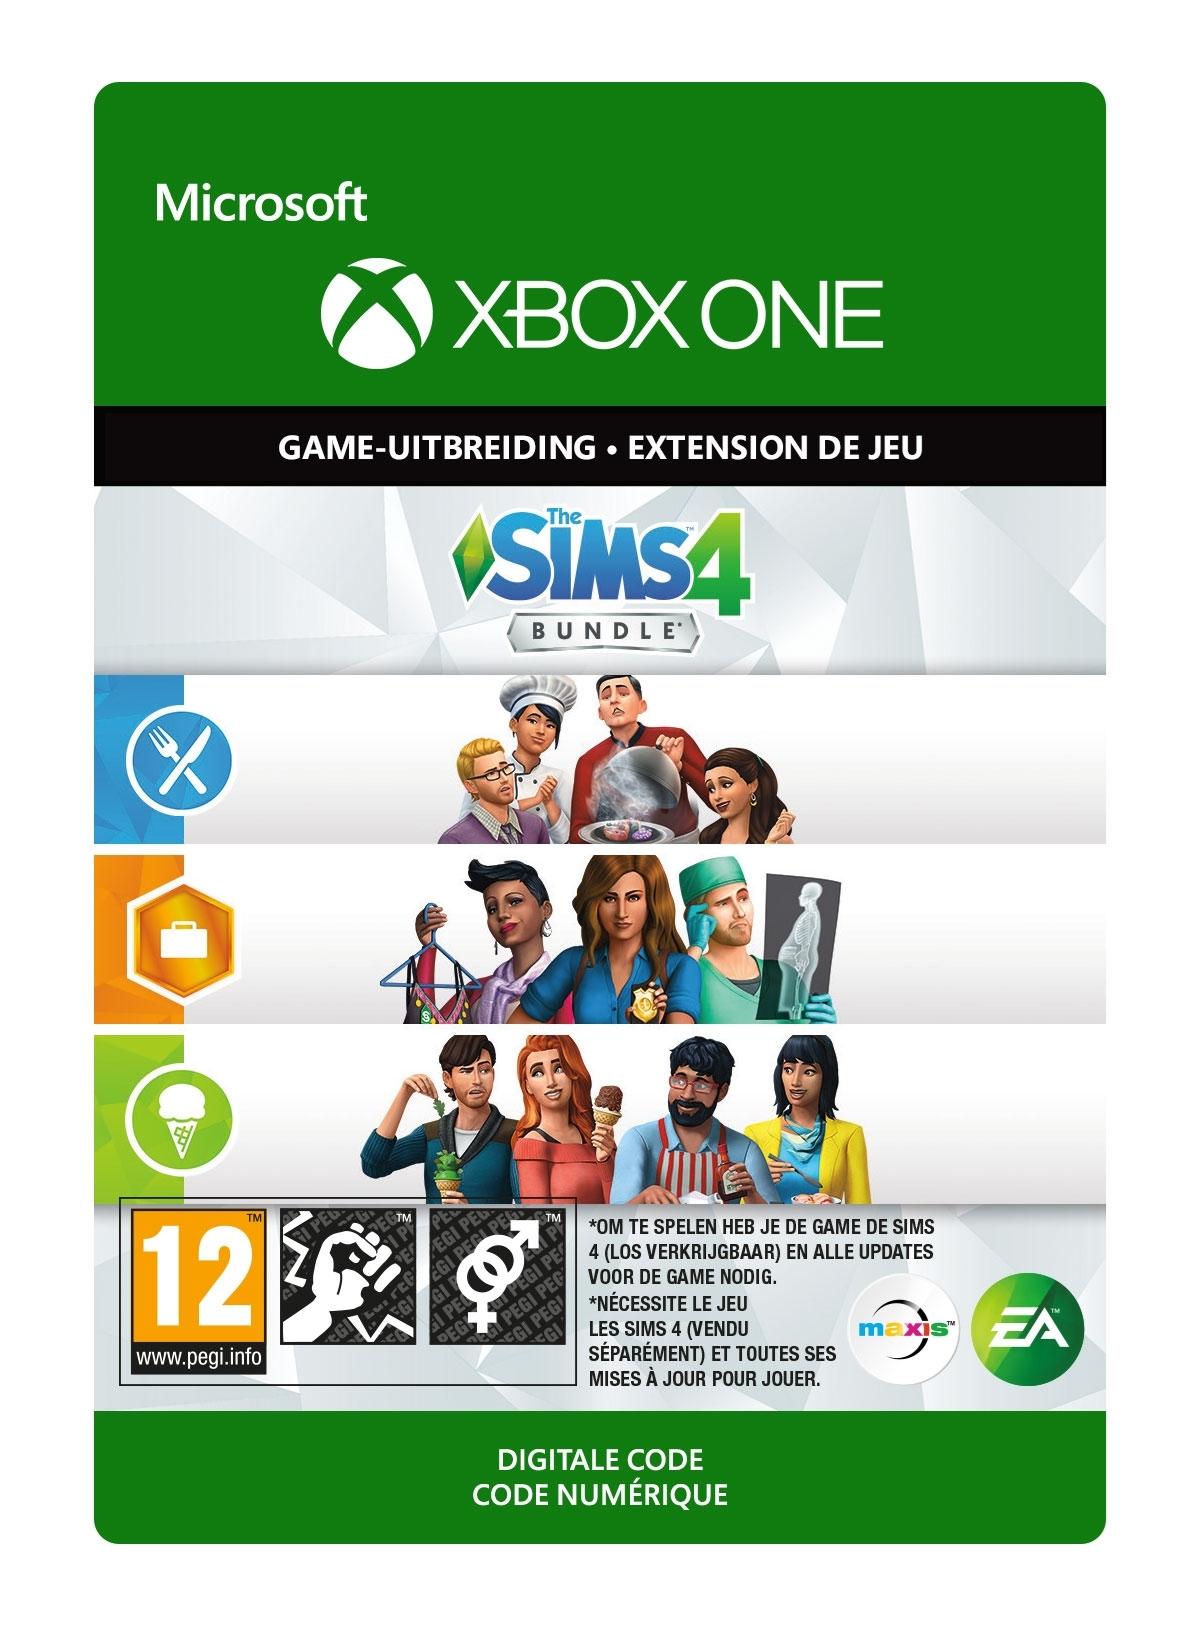 The Sims 4 Bundle (Get To Work, Dine Out, Cool Kitchen Stuff) - Xbox One - Content Bundle | 7D4-00300 (7c3143ff-2da9-904e-bcfd-ff7ffb9a93f5)